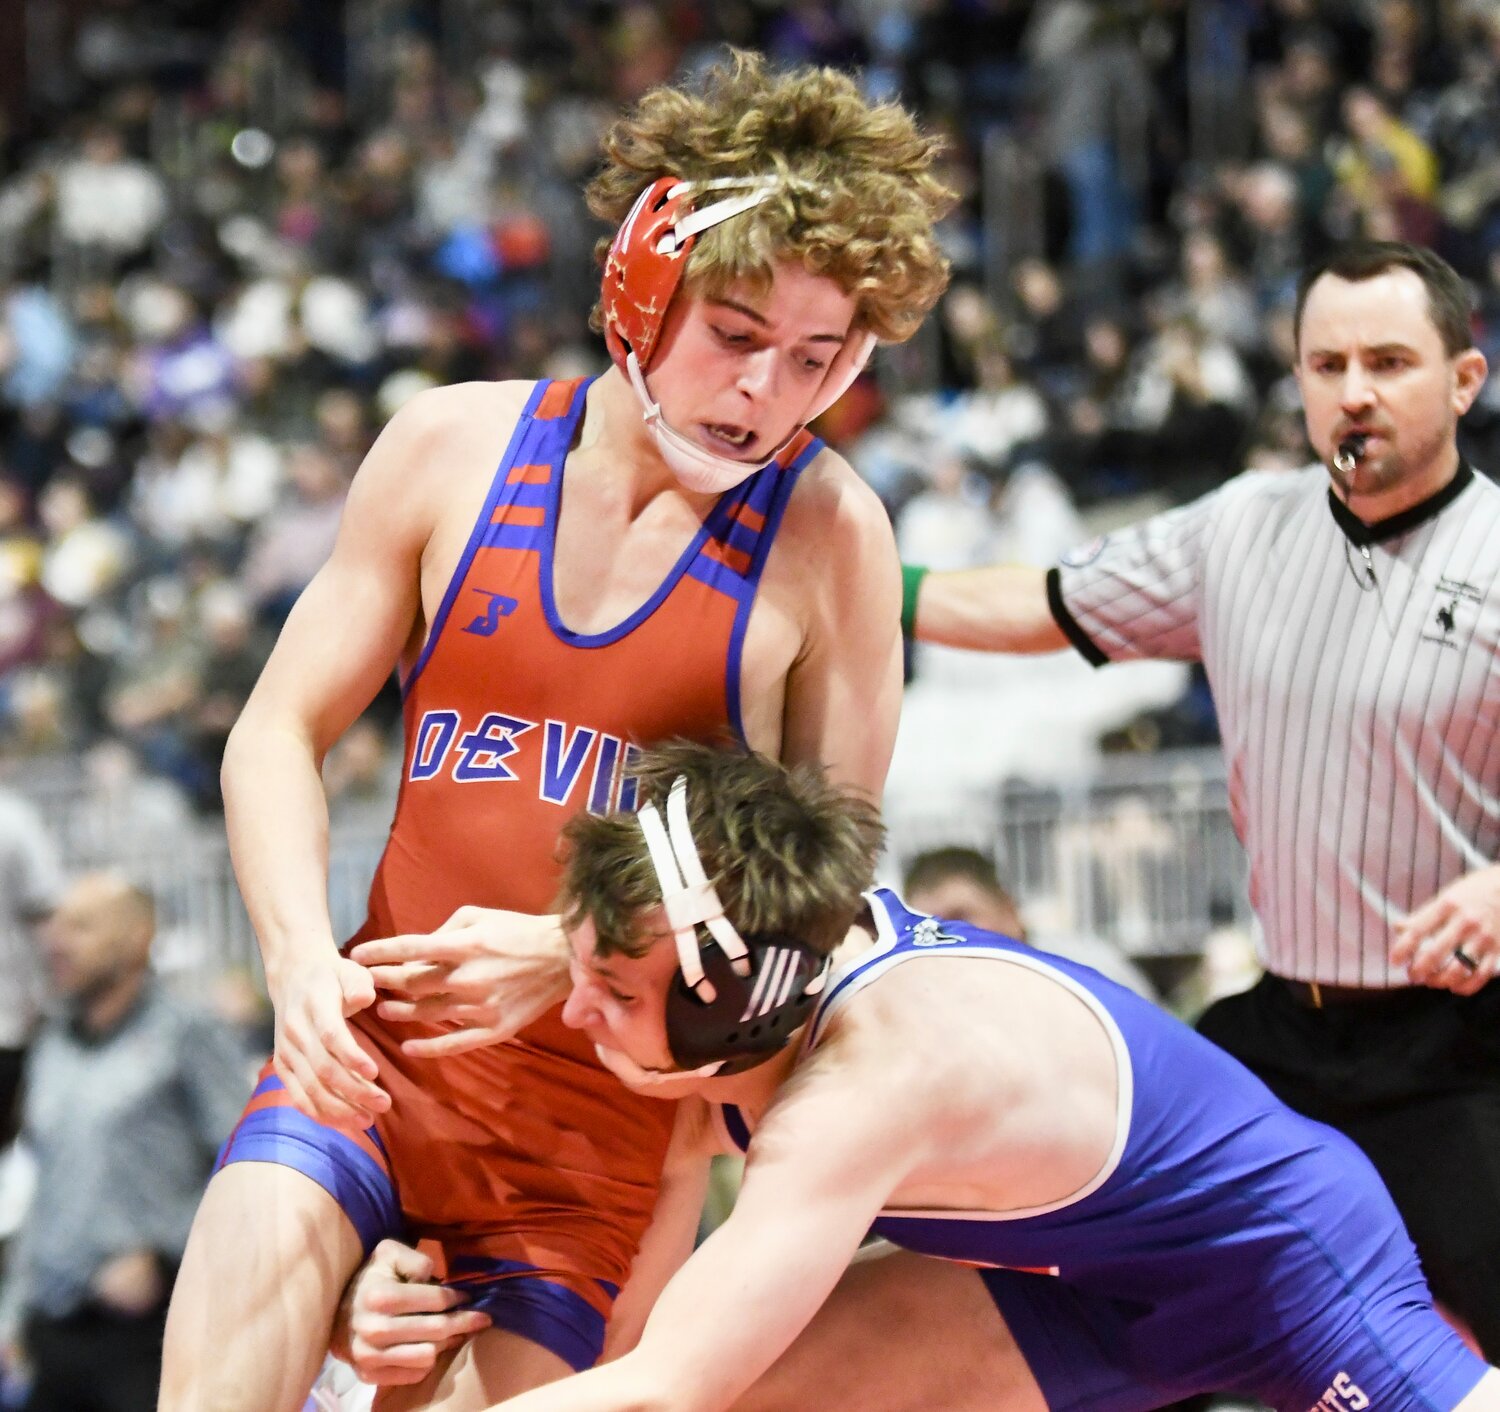 Red Devil 126-pounder Kolby Hamilton finished fifth at the 3A State Wrestling Championships in Casper over the weekend.